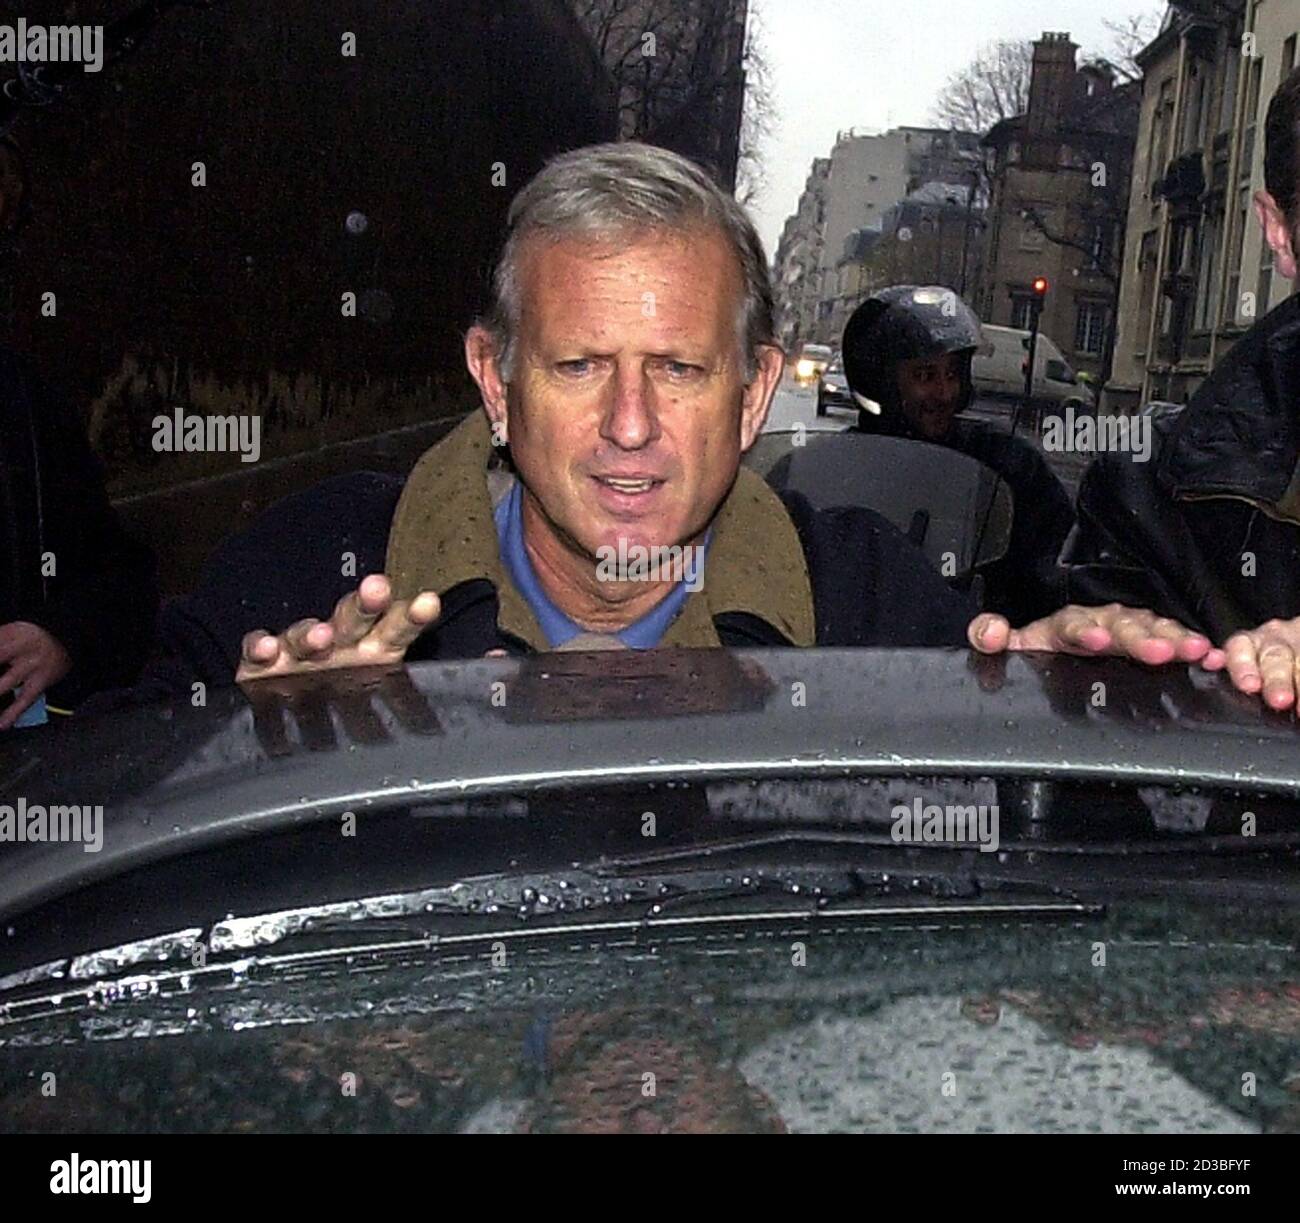 Former Cooperation Minister Michel Roussin  closes the trunk of his car as he leaves Paris's Sante prison December 6, 2000. Roussin was incarcerated and released on bail in connection with alleged party financing scams at Paris city hall. Stock Photo